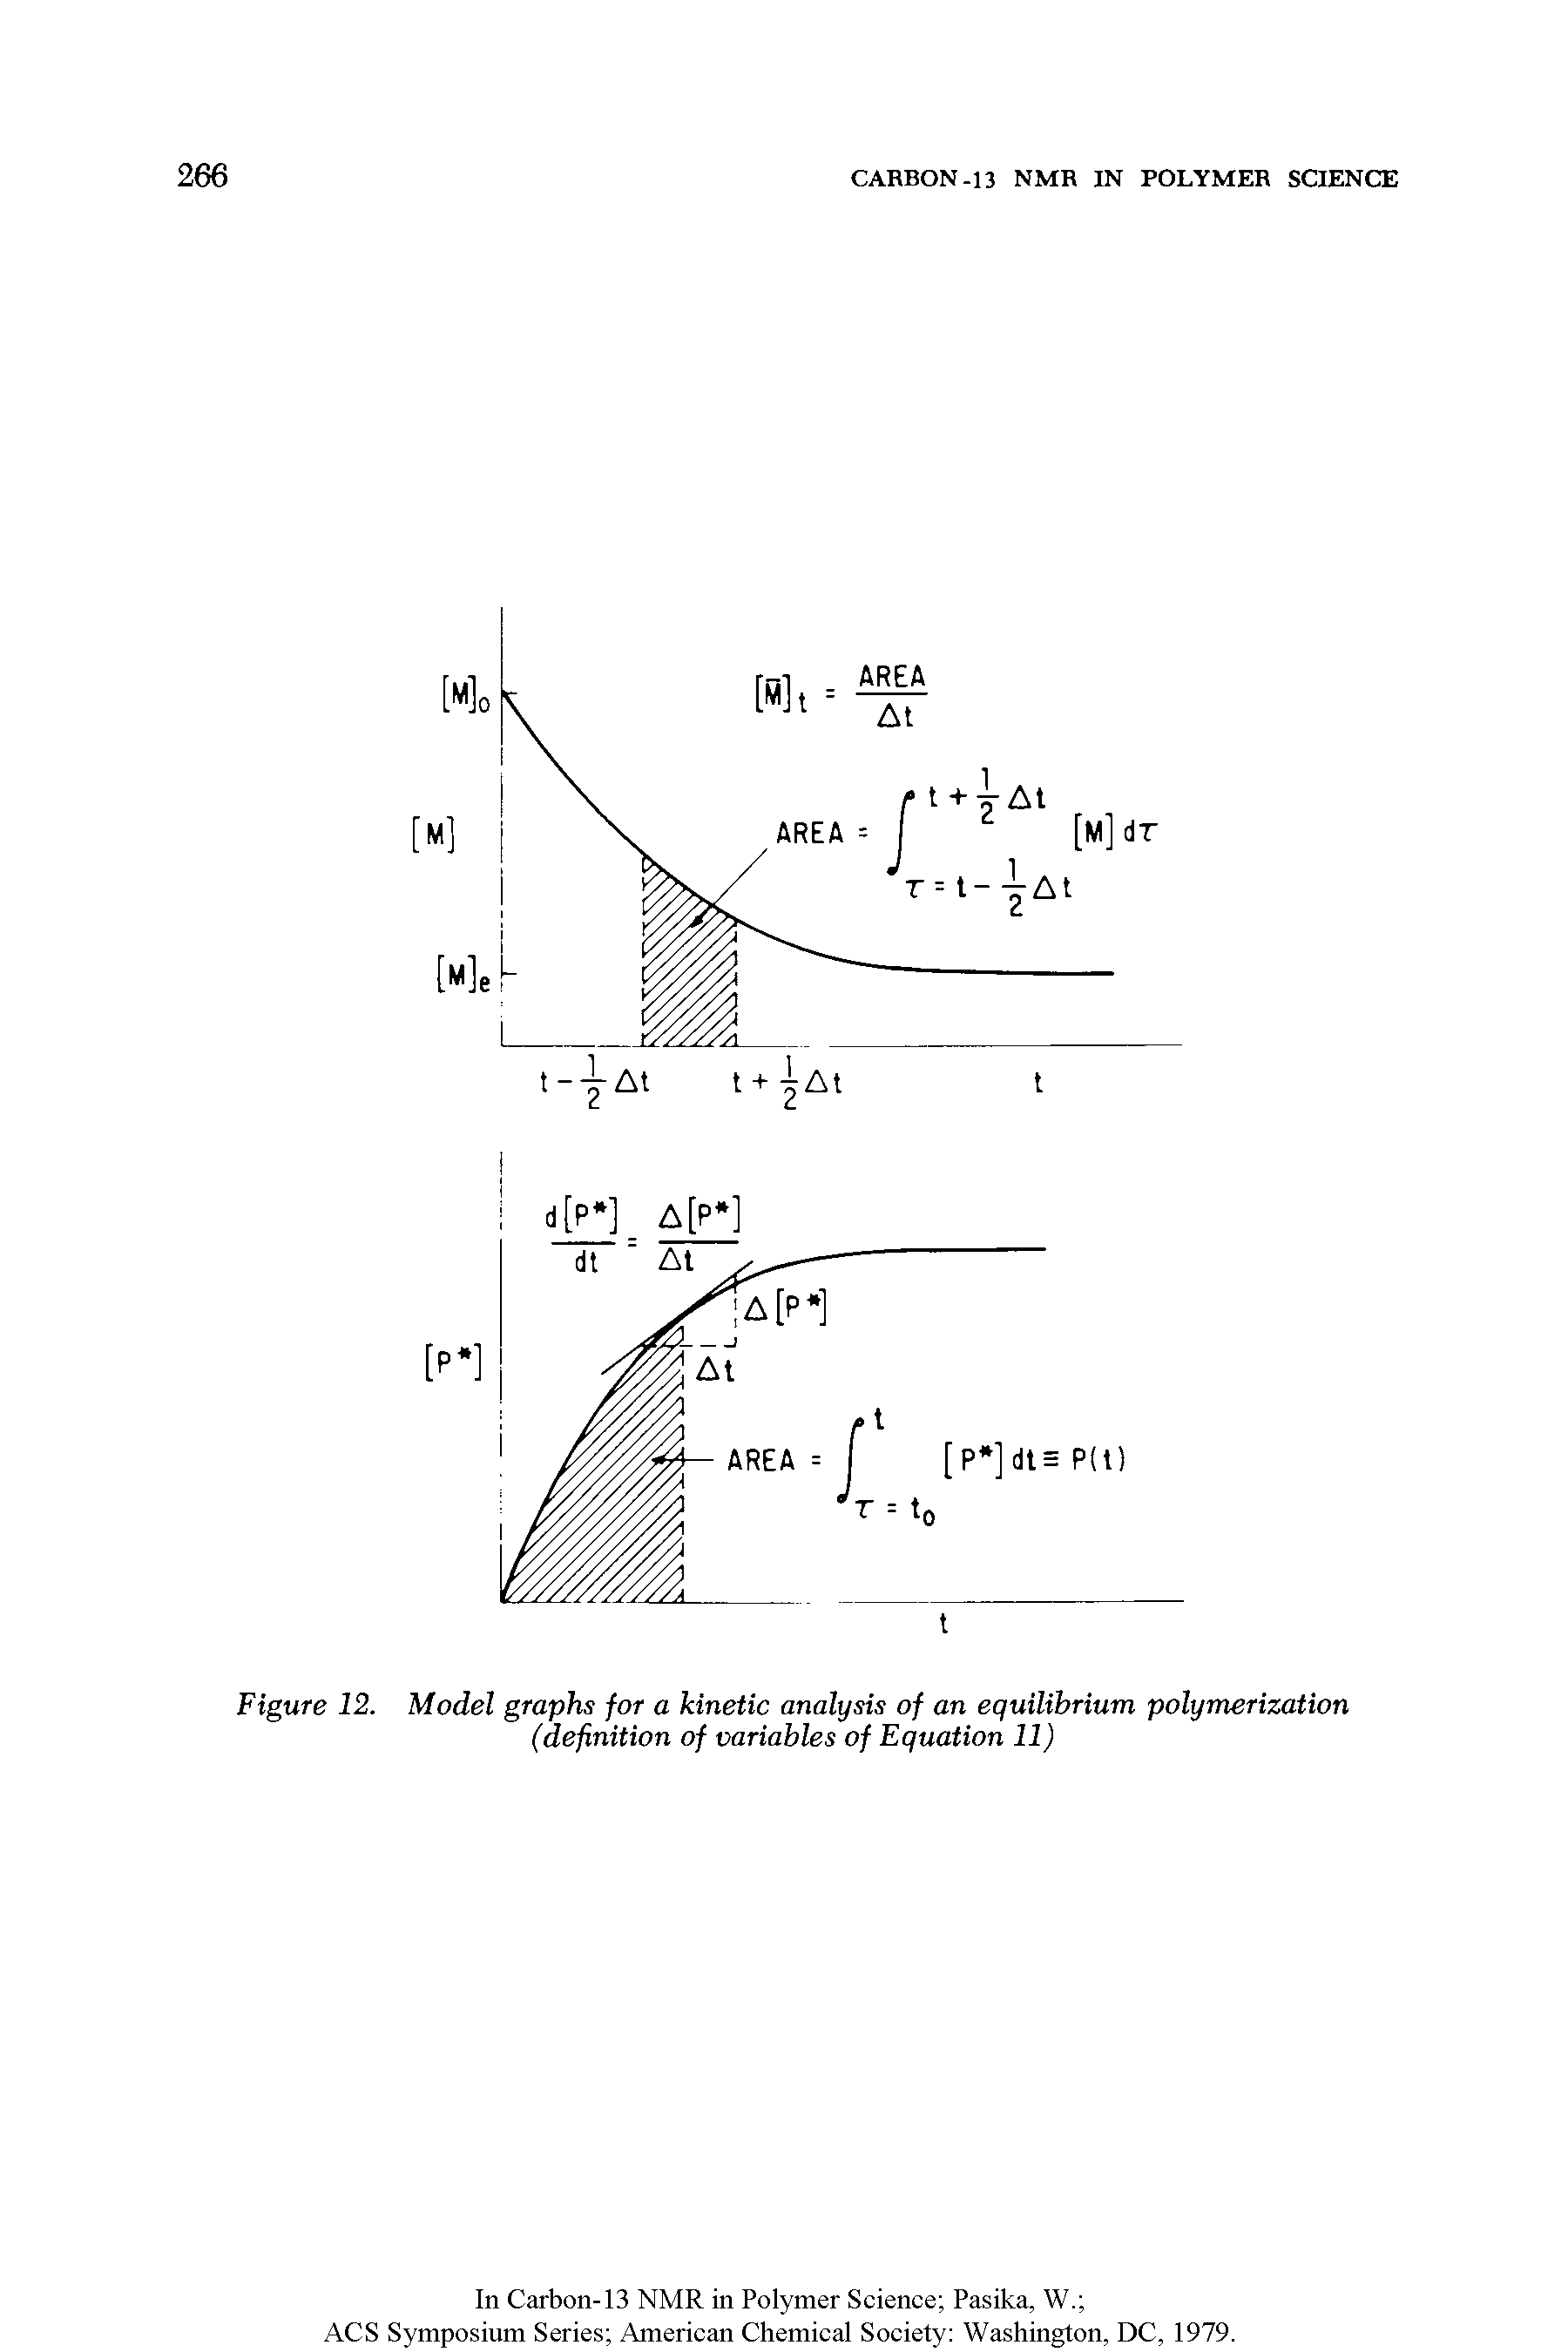 Figure 12. Model graphs for a kinetic analysis of an equilibrium polymerization (definition of variables of Equation 11)...